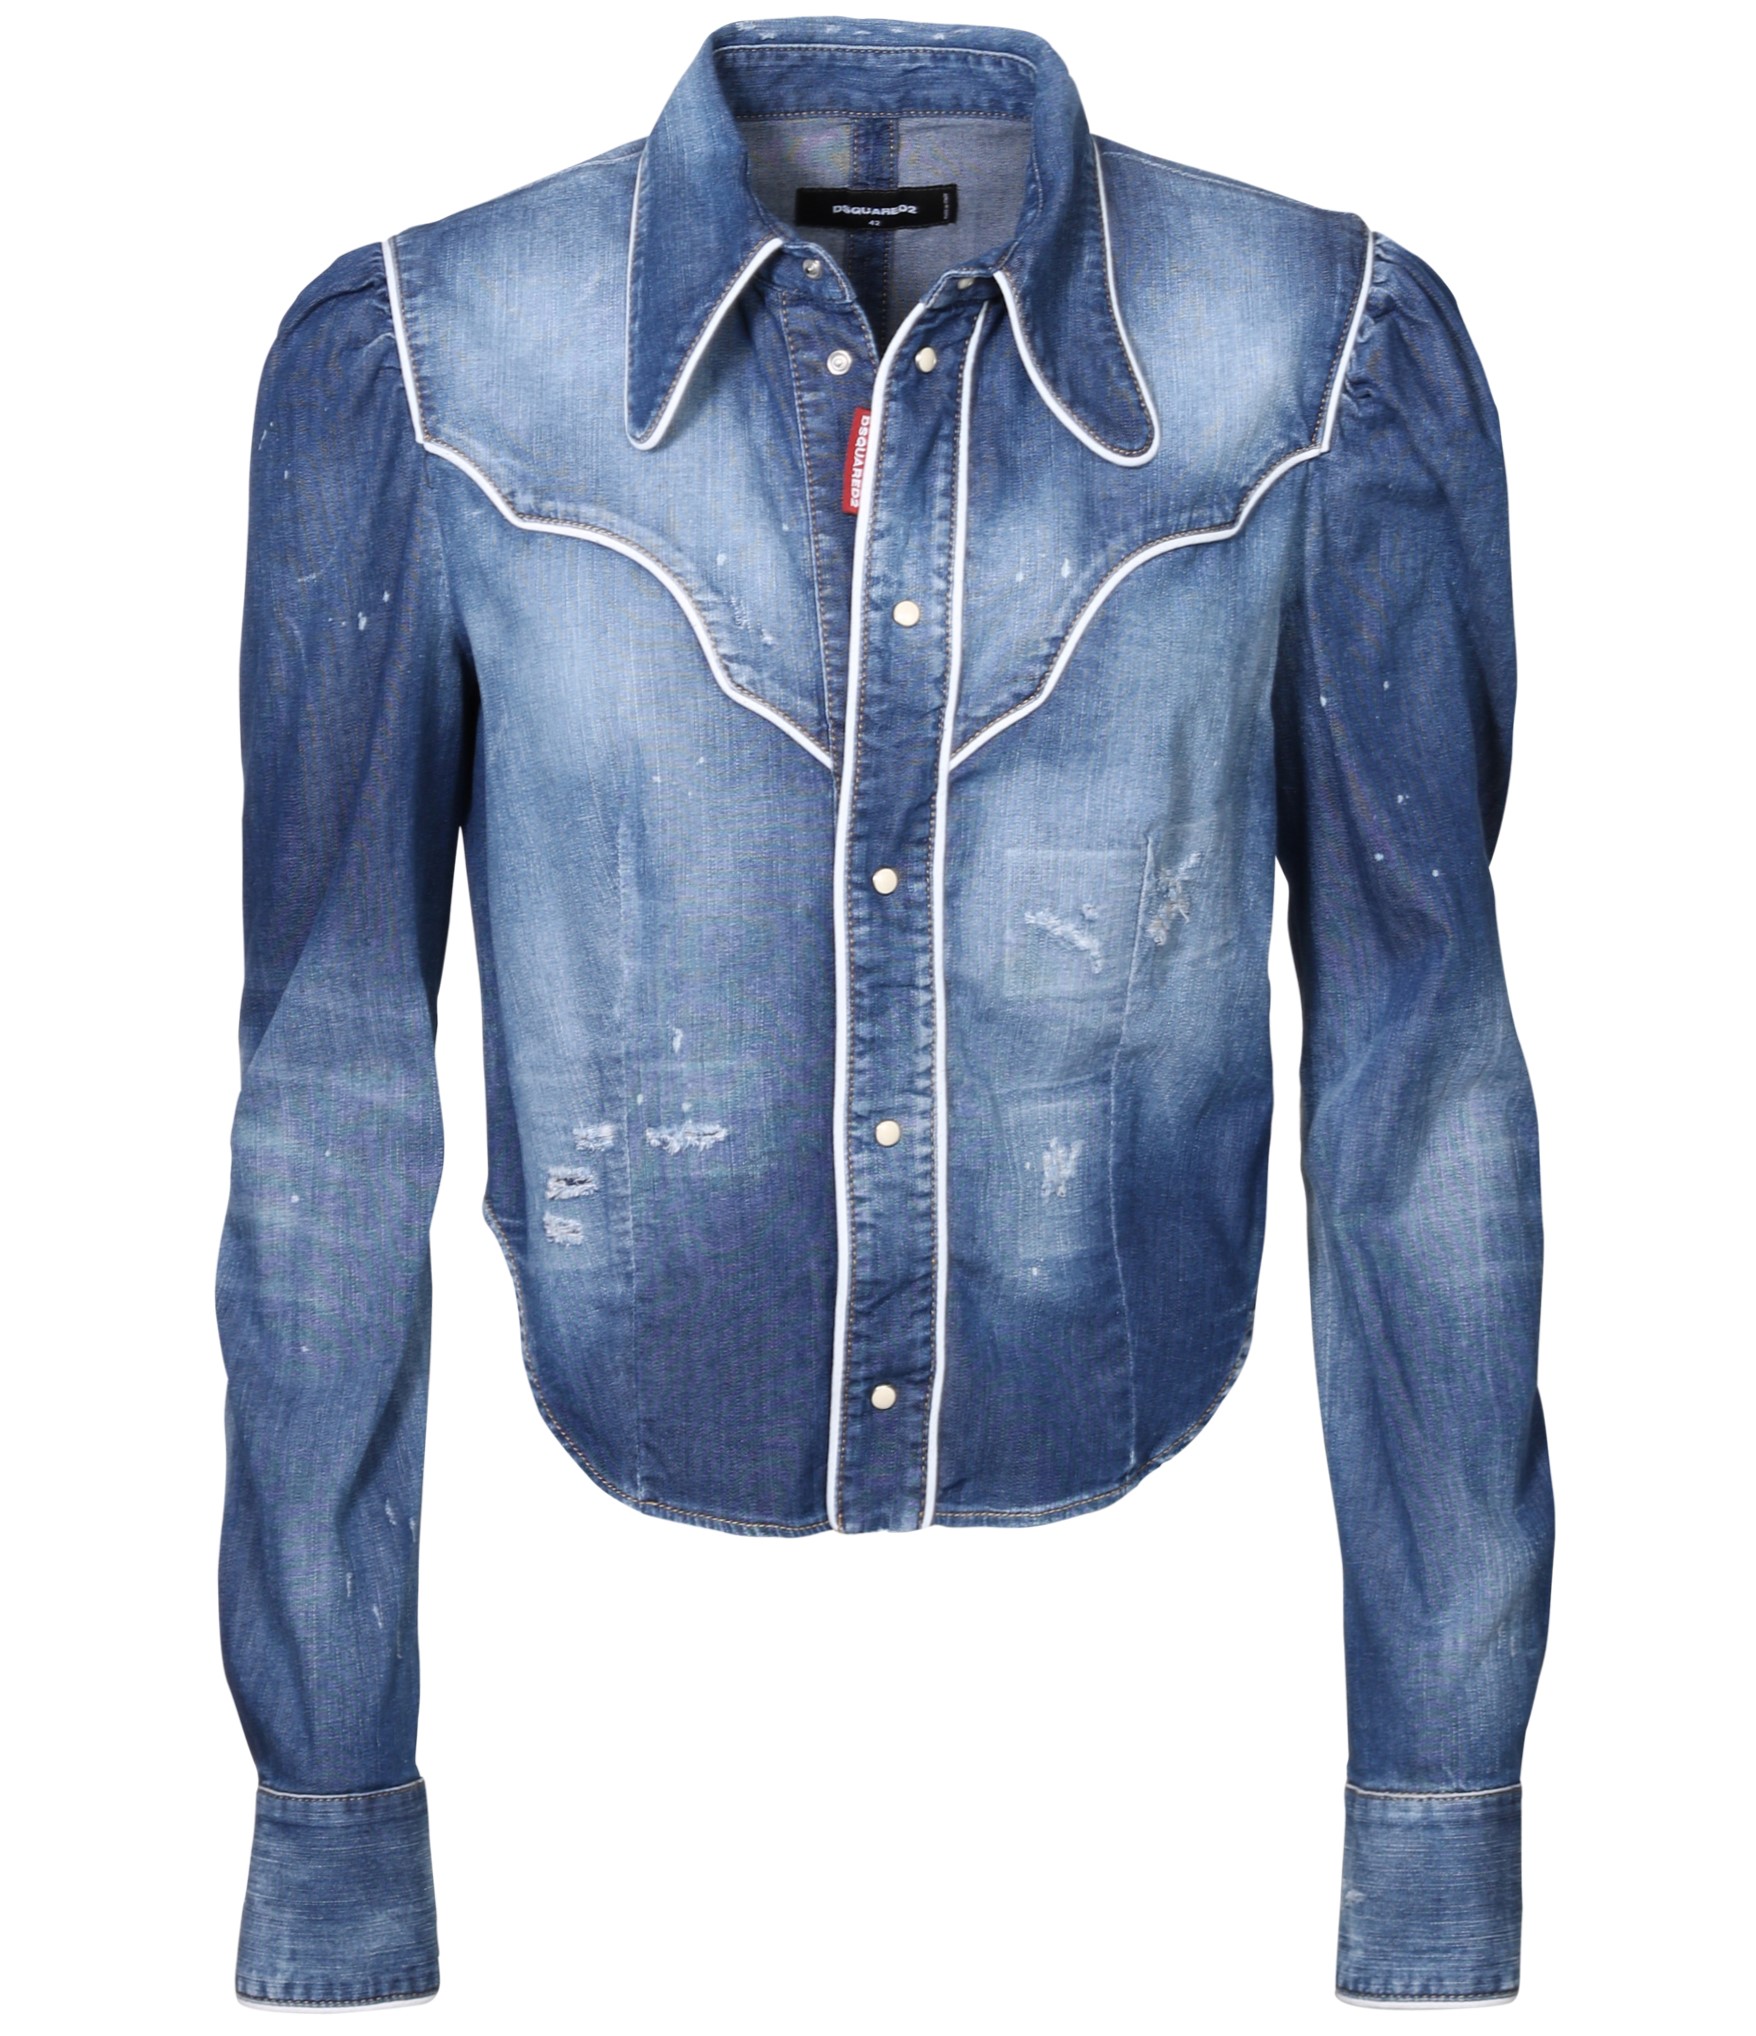 DSQUARED2 Cowboy Jeans Shirt in Washed Blue